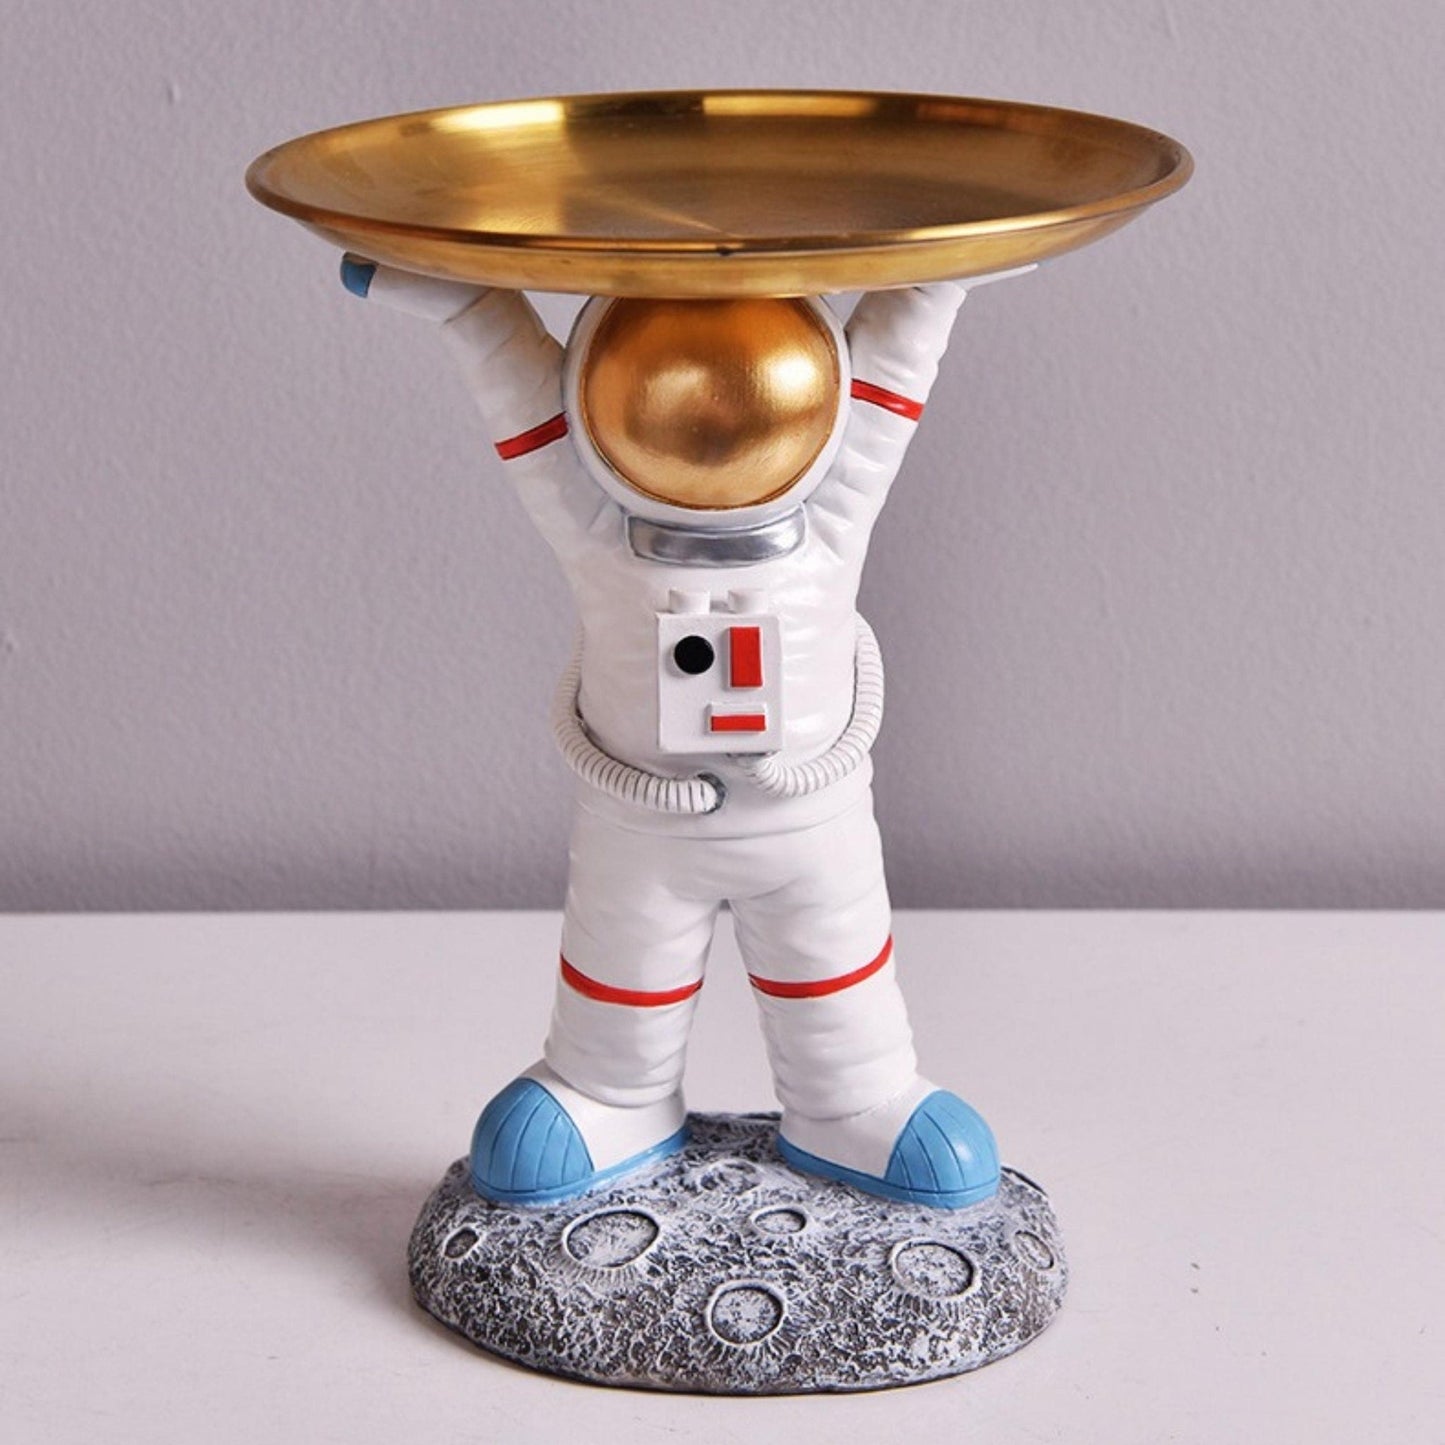 Astronaut Storage Platter Trays - Space Mesmerise - Space Gifts | Lamps | Statues | Home Decor